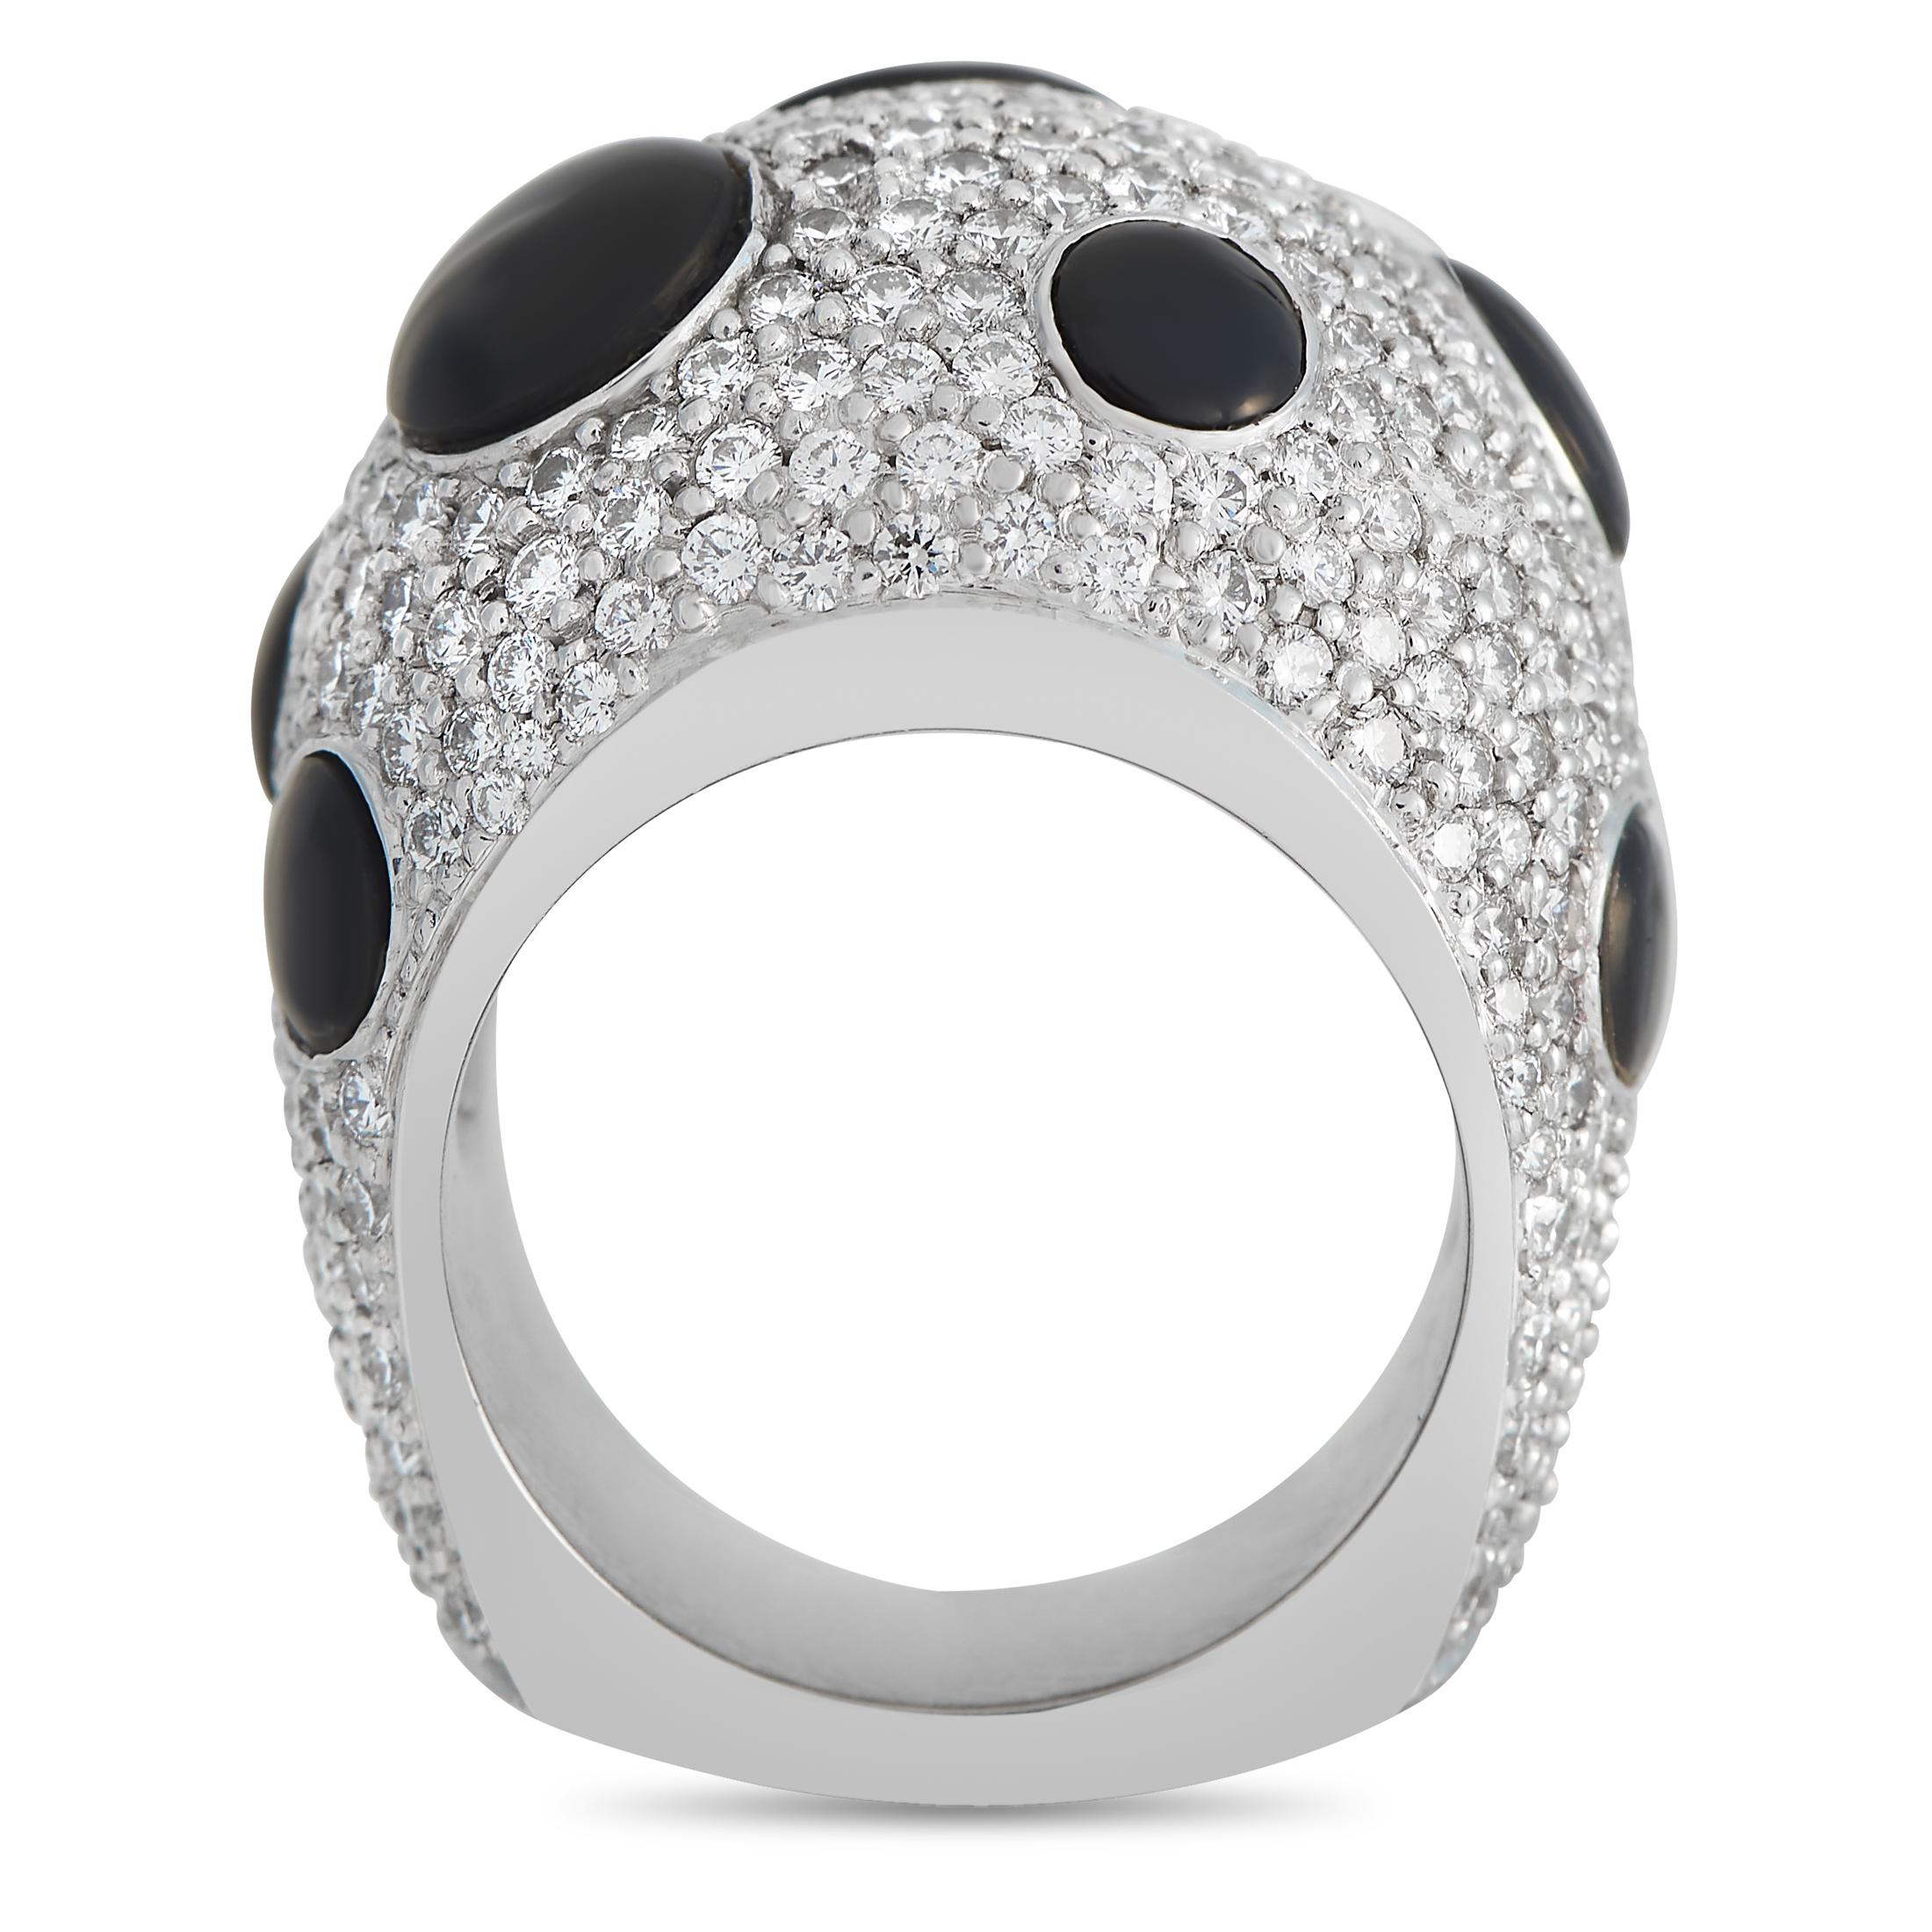 A daring choice. Bold, large, and showy, this statement ring is impossible to miss. Its oversized Euro shank measures 12mm thick, with a top height of 9mm. The ring has a square-shaped bottom edge and a high-dome top covered with pav-set with